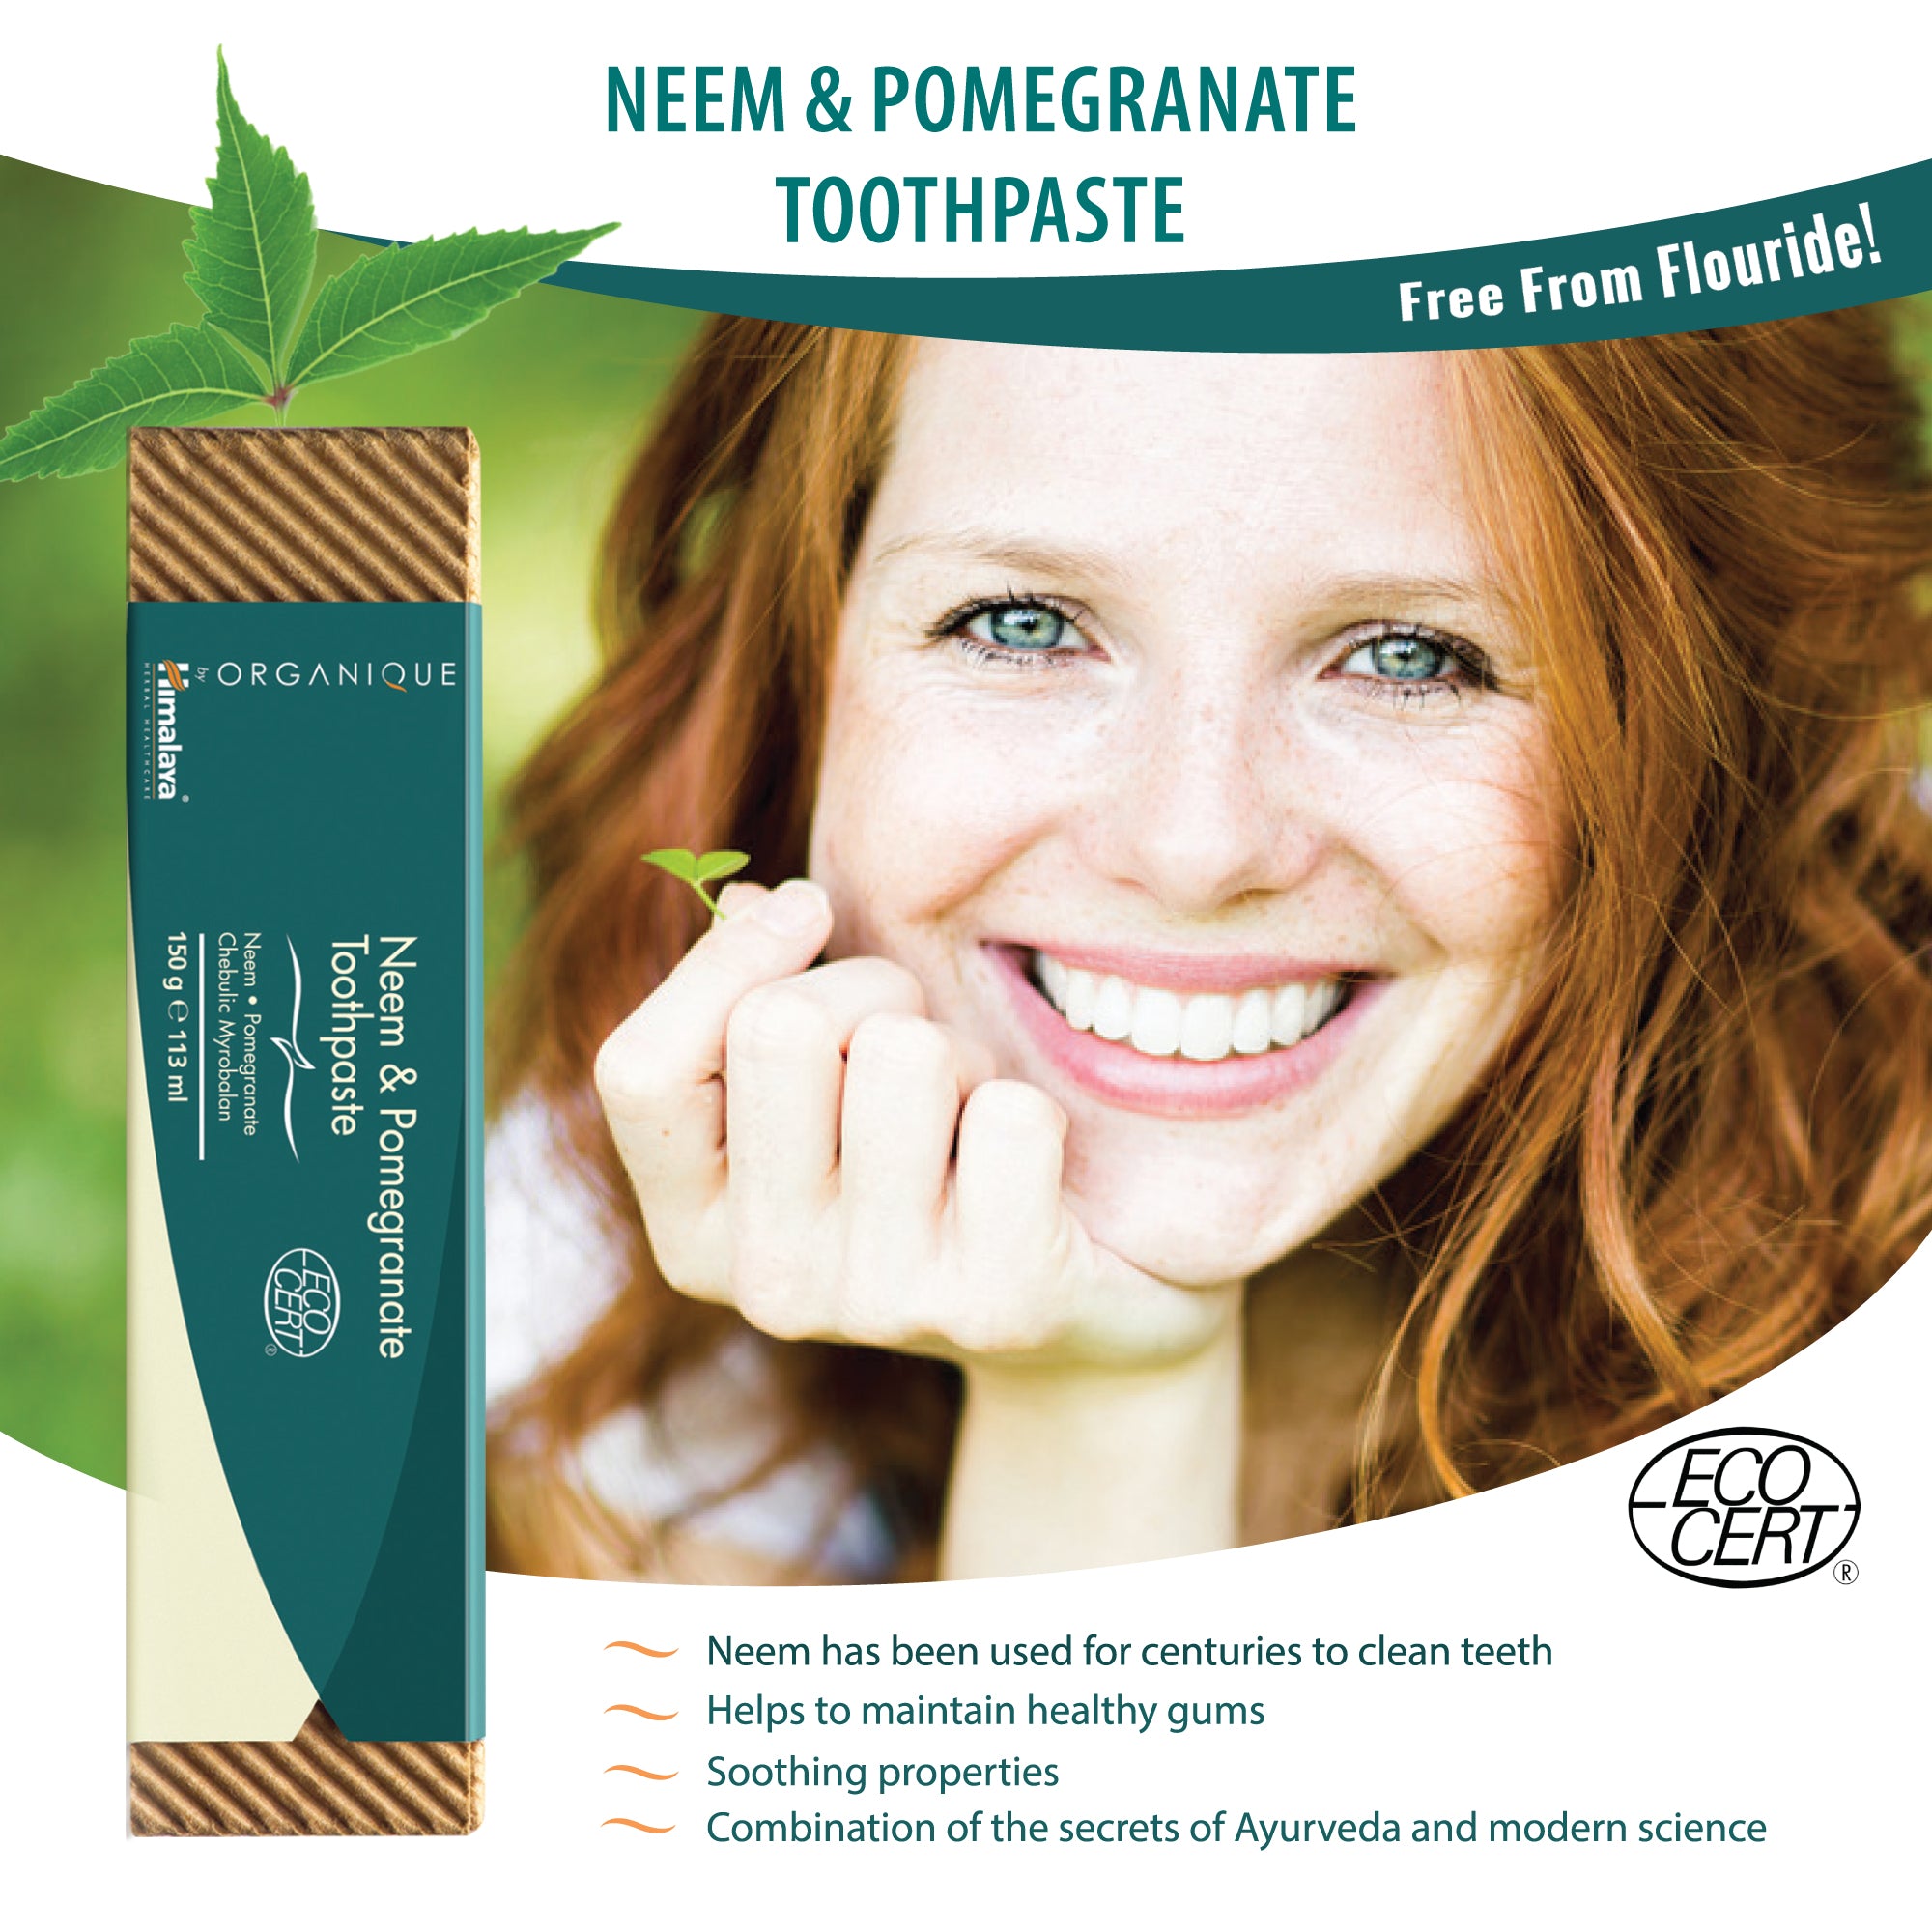 Himalaya ORGANIQUE Neem & Pomegranate Toothpaste - 150g (Pack of 2)